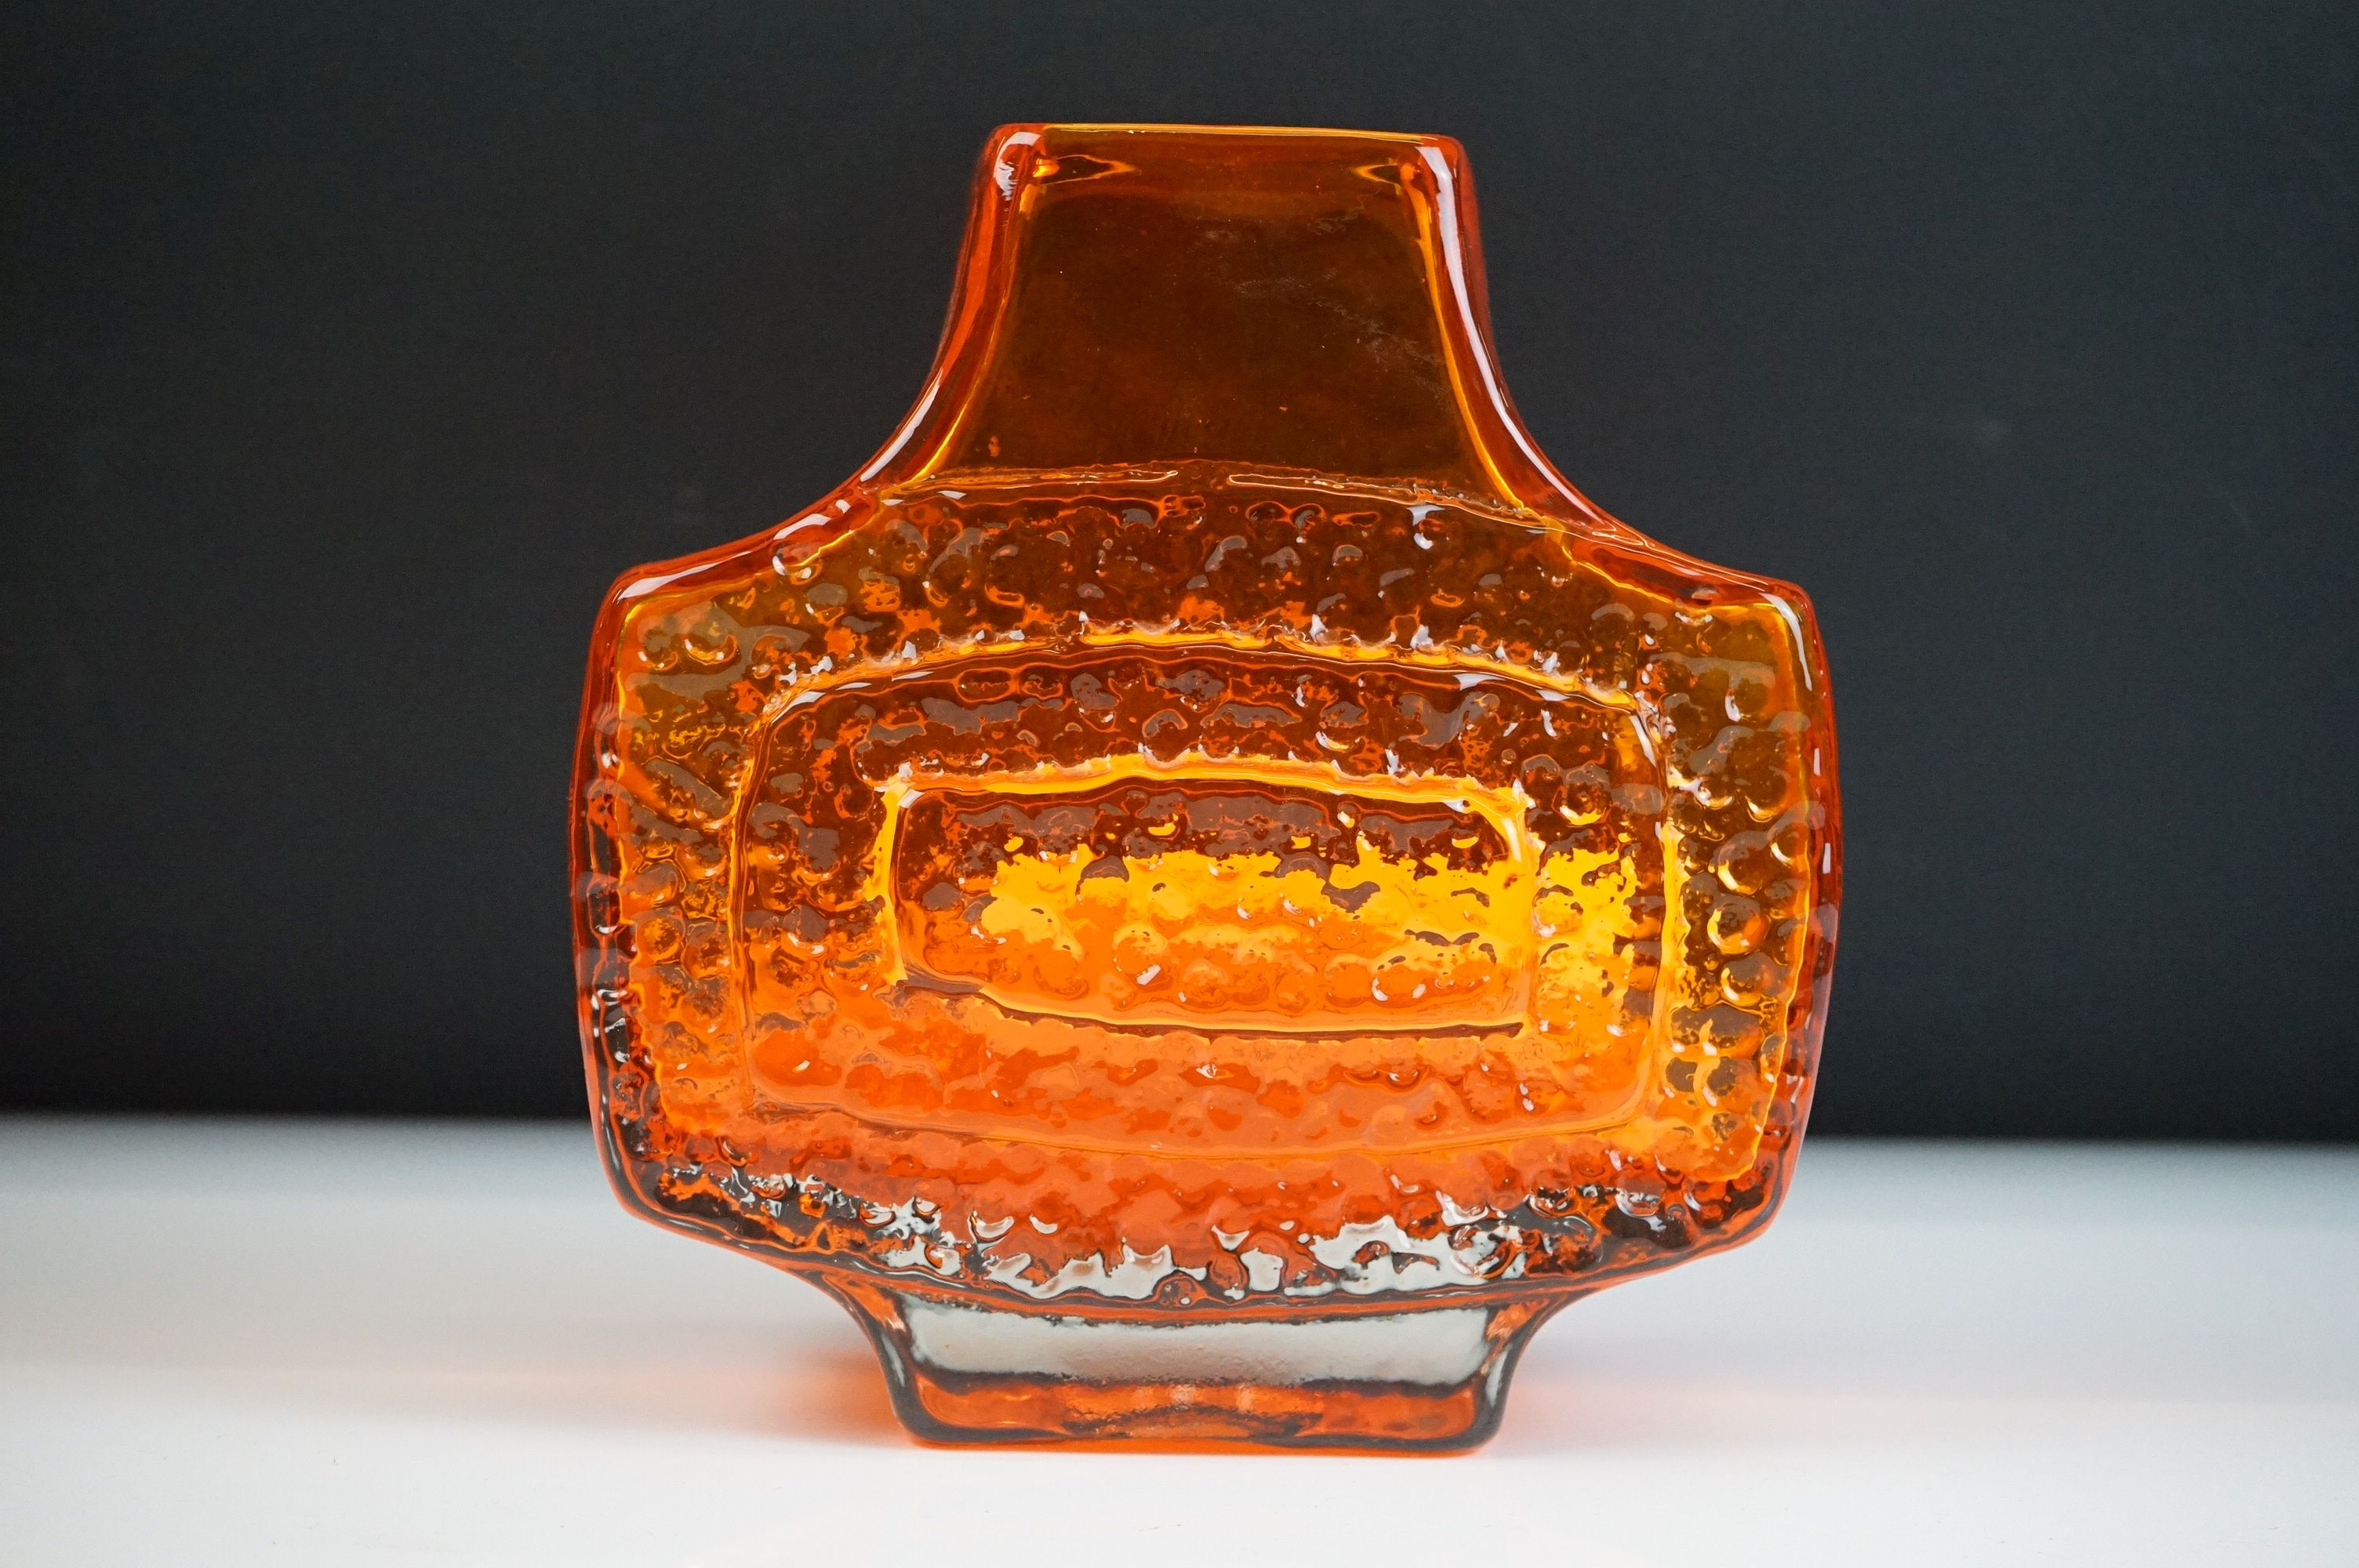 Whitefriars Textured Glass Concentric ' TV ' Pattern Vase, pattern no. 9677, in the Tangerine - Image 2 of 9